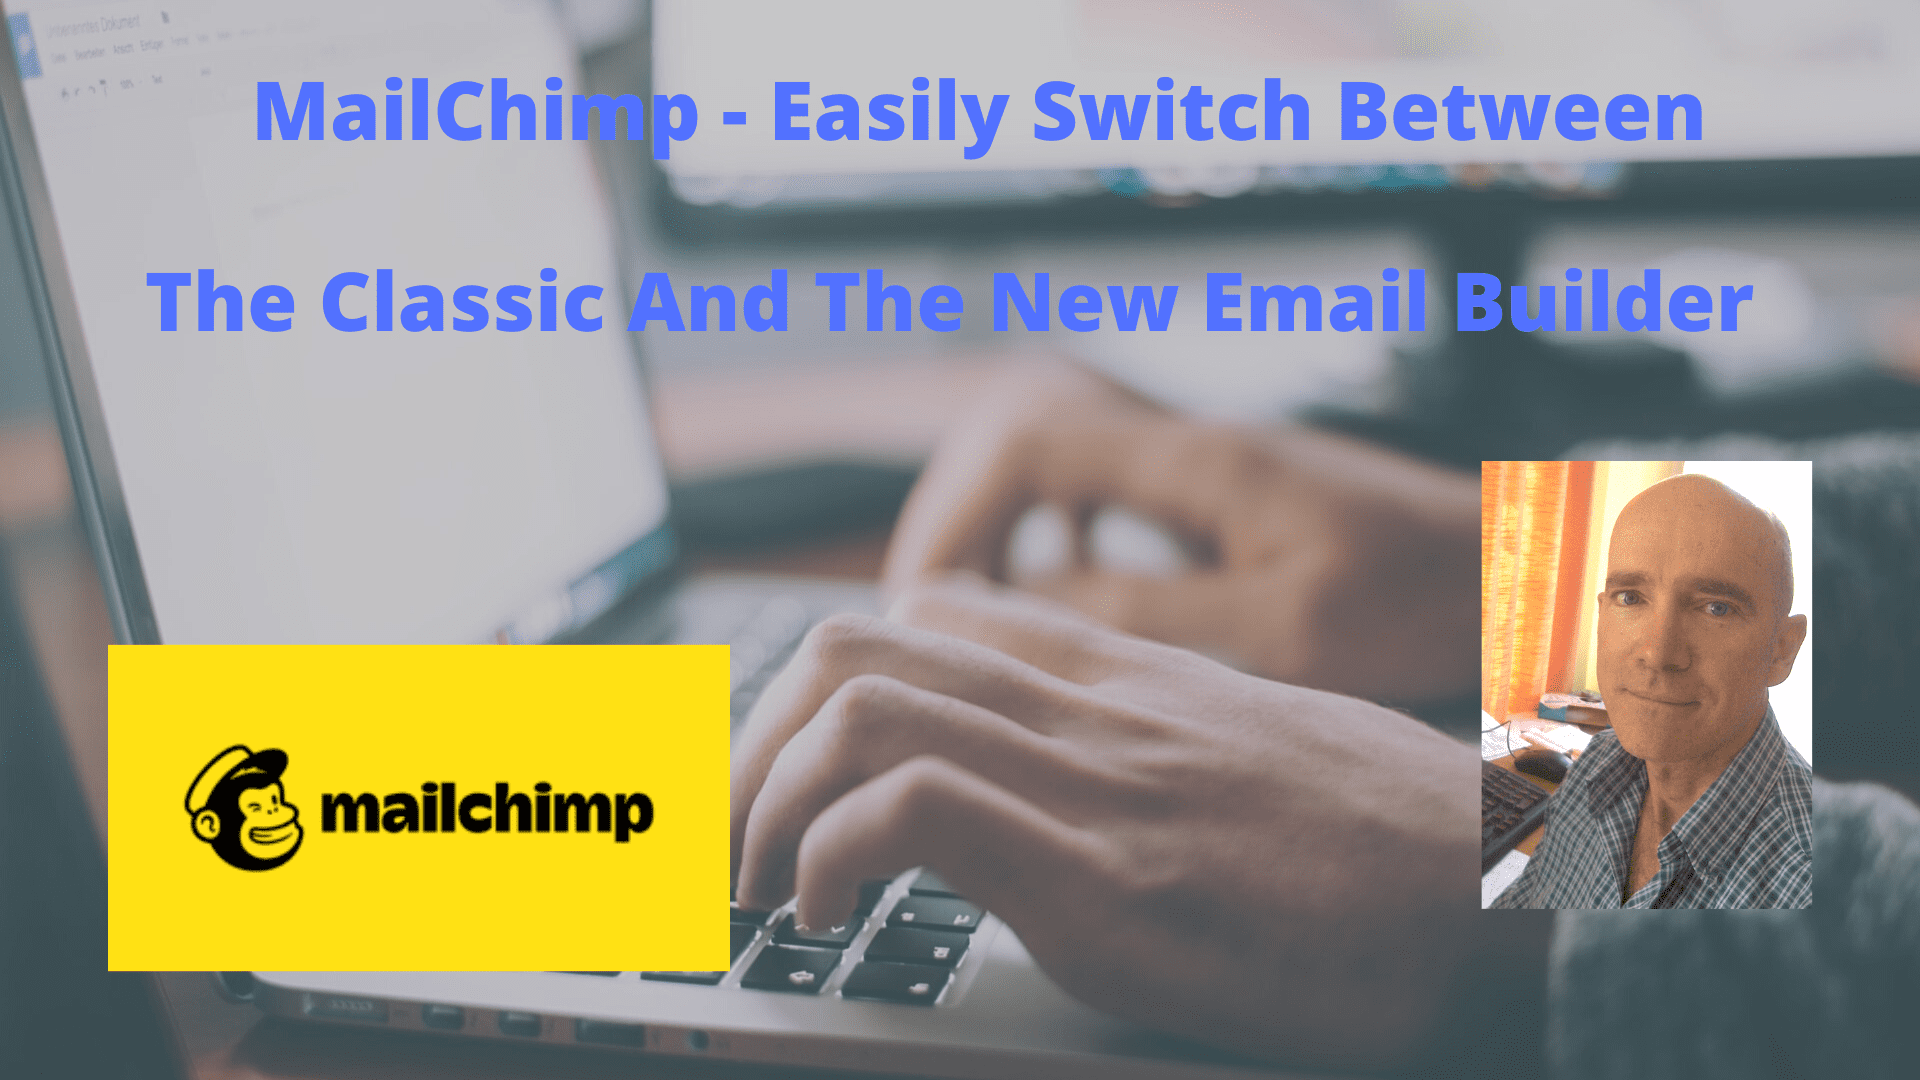 Mailchimp - Easily Switch Between the Classic and the New Email Builder